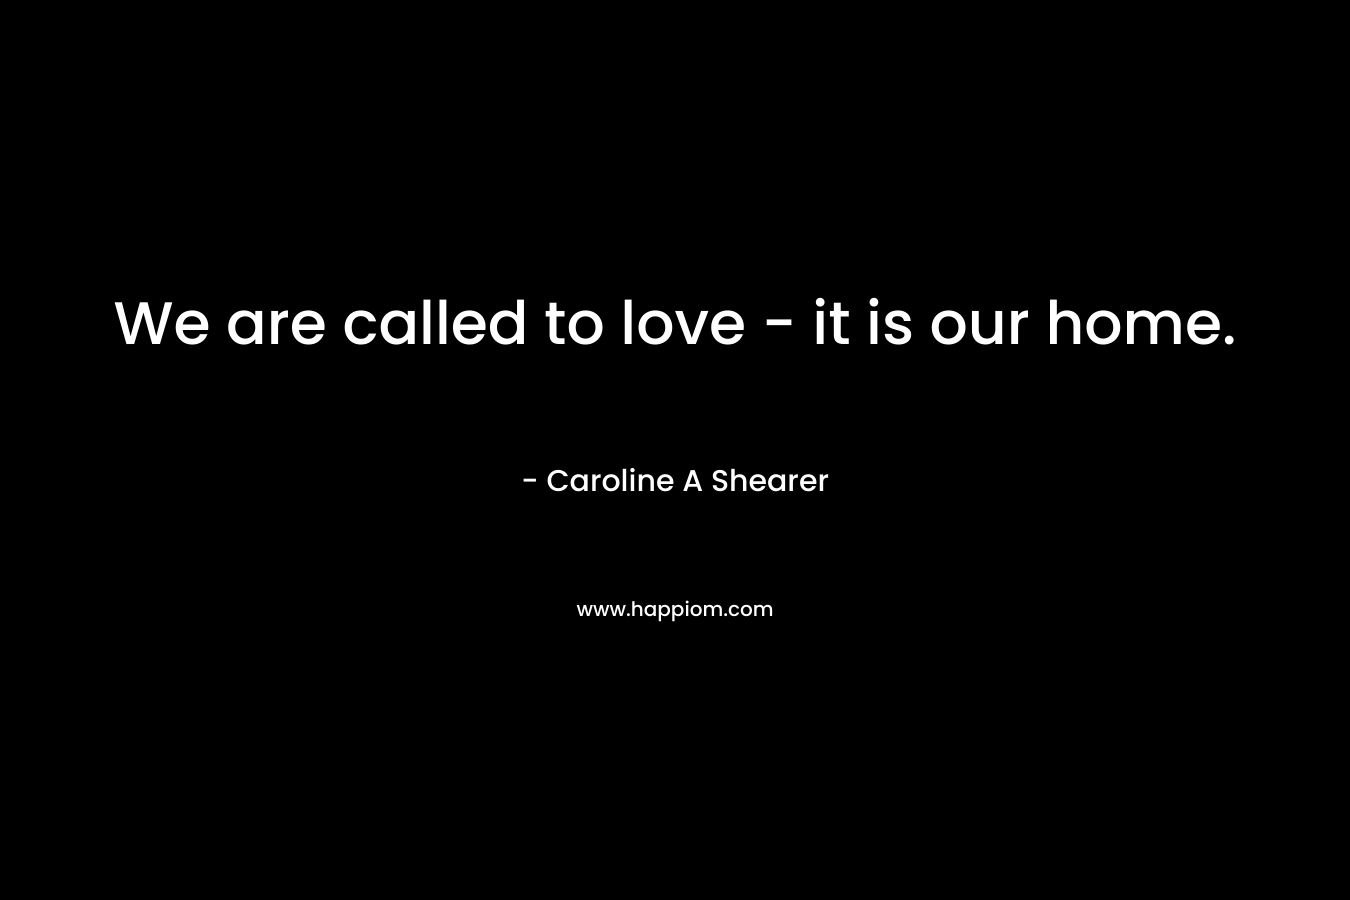 We are called to love - it is our home.